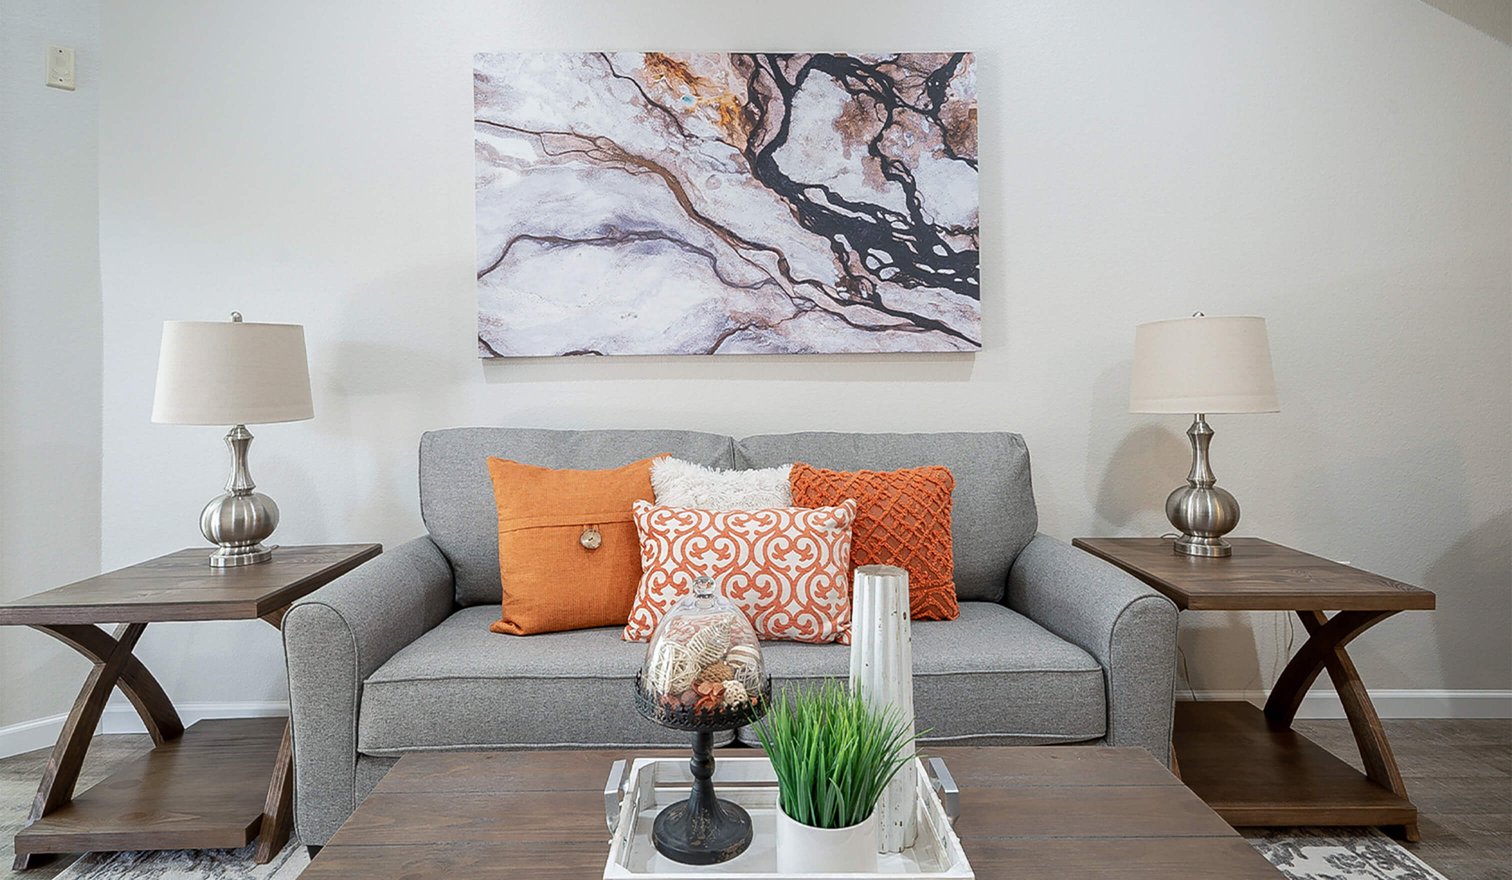 Living room with orange accent pillows on a gray couch, two end tables with lamps, a coffee table and a painting